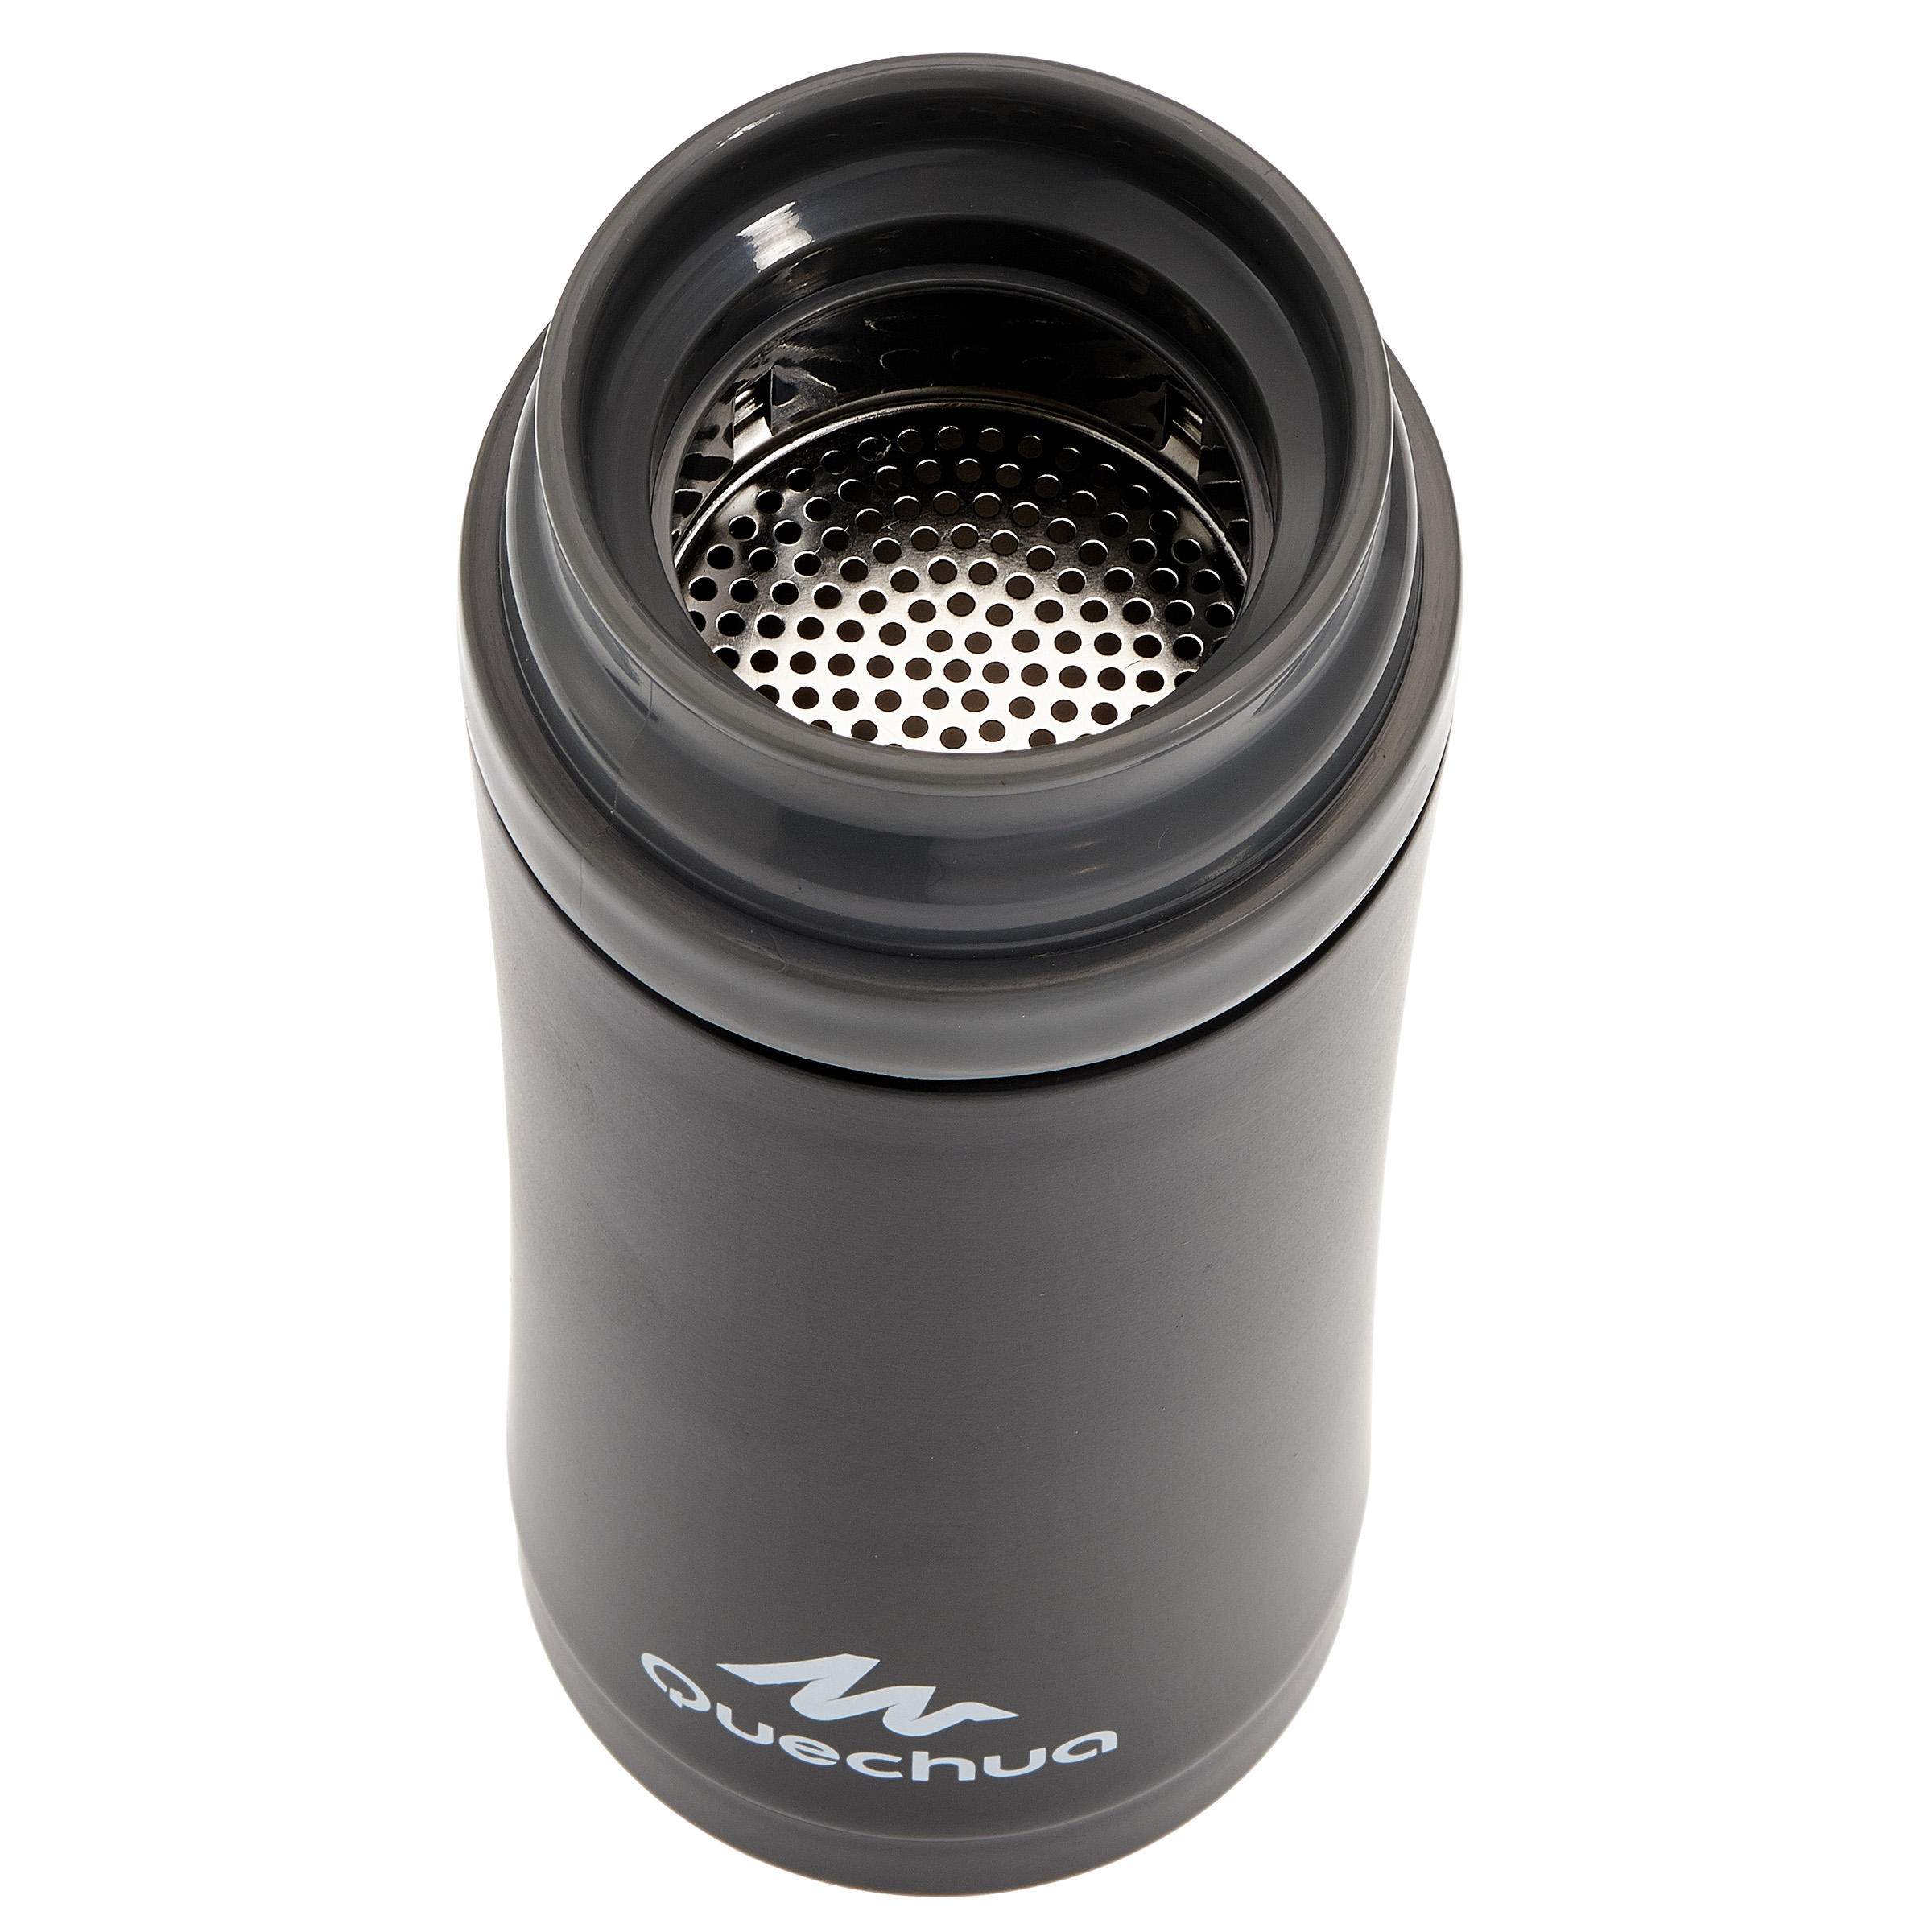 Insulated stainless steel hikers mug 0 